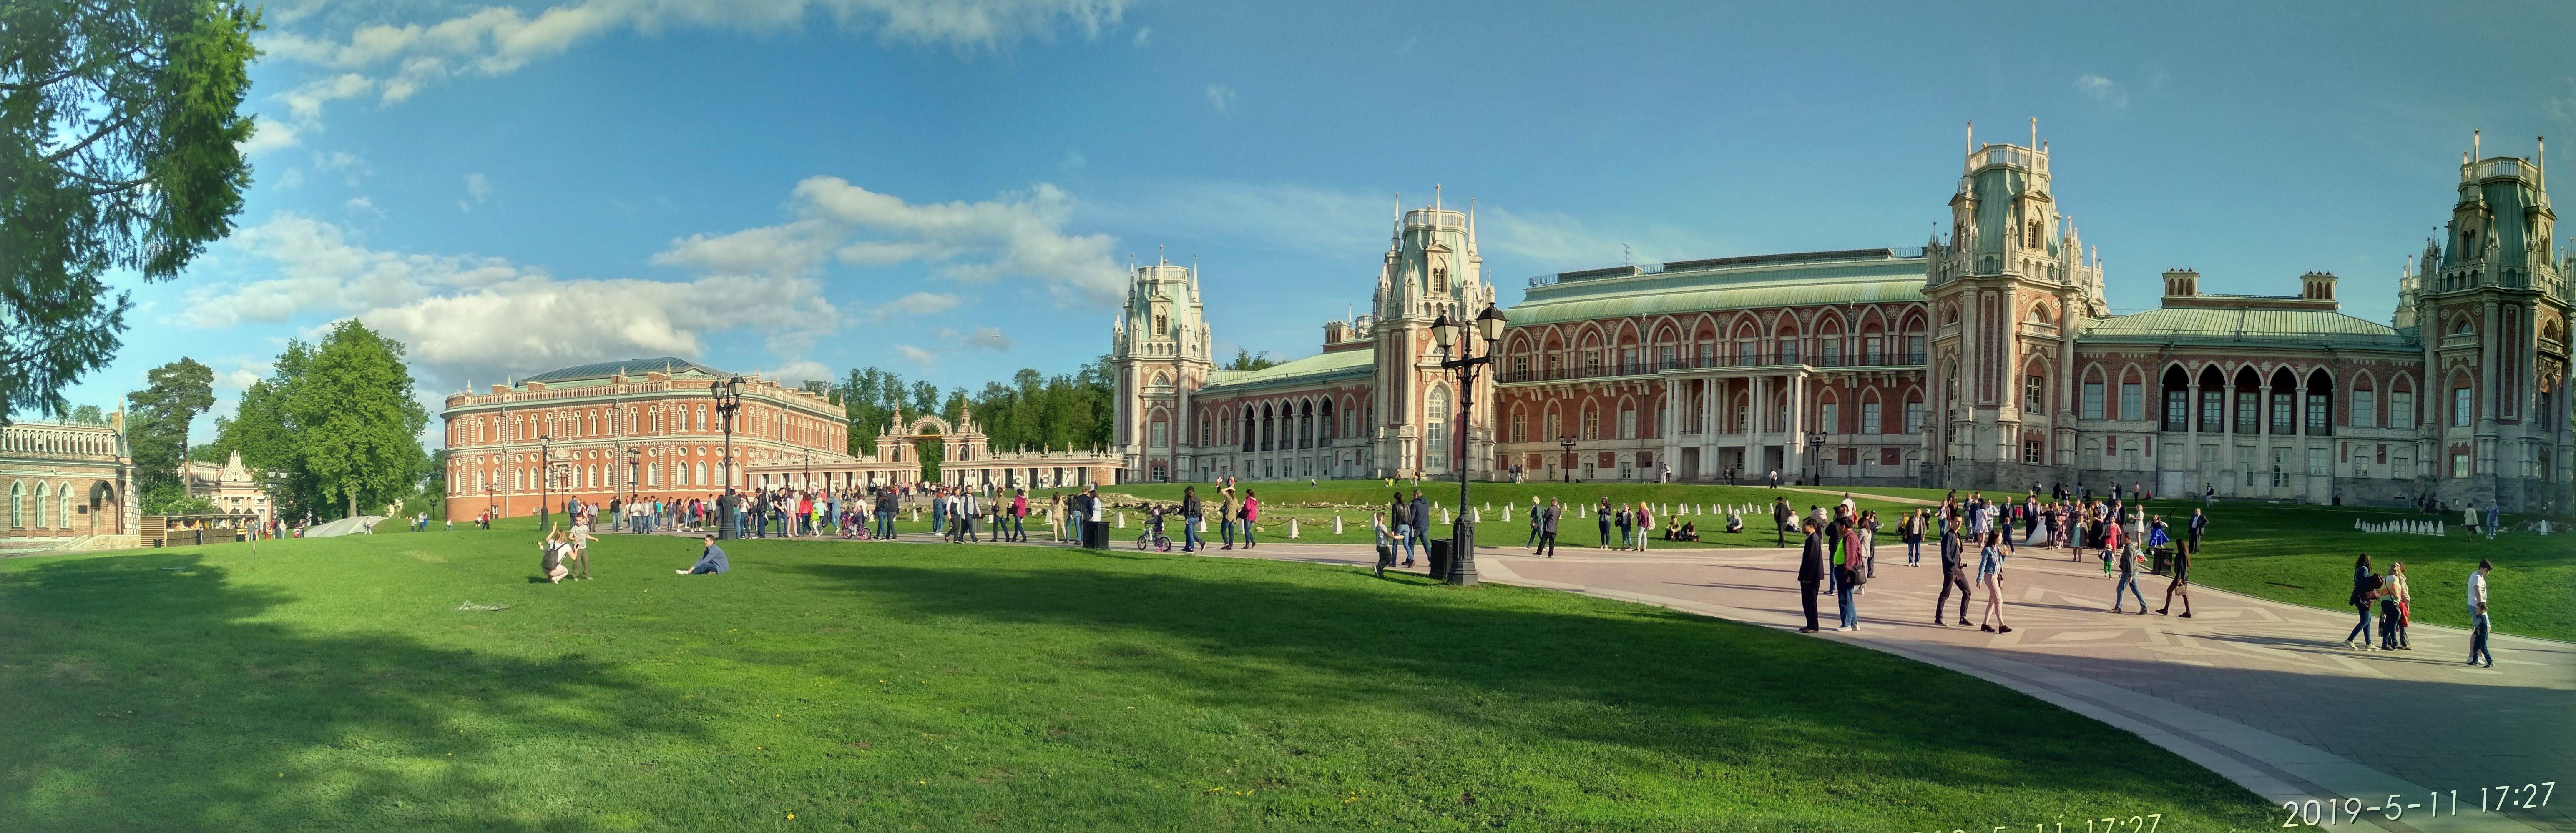 The Grand Palace of the XVIII century with a landscape park and a historical-architectural and art museum.